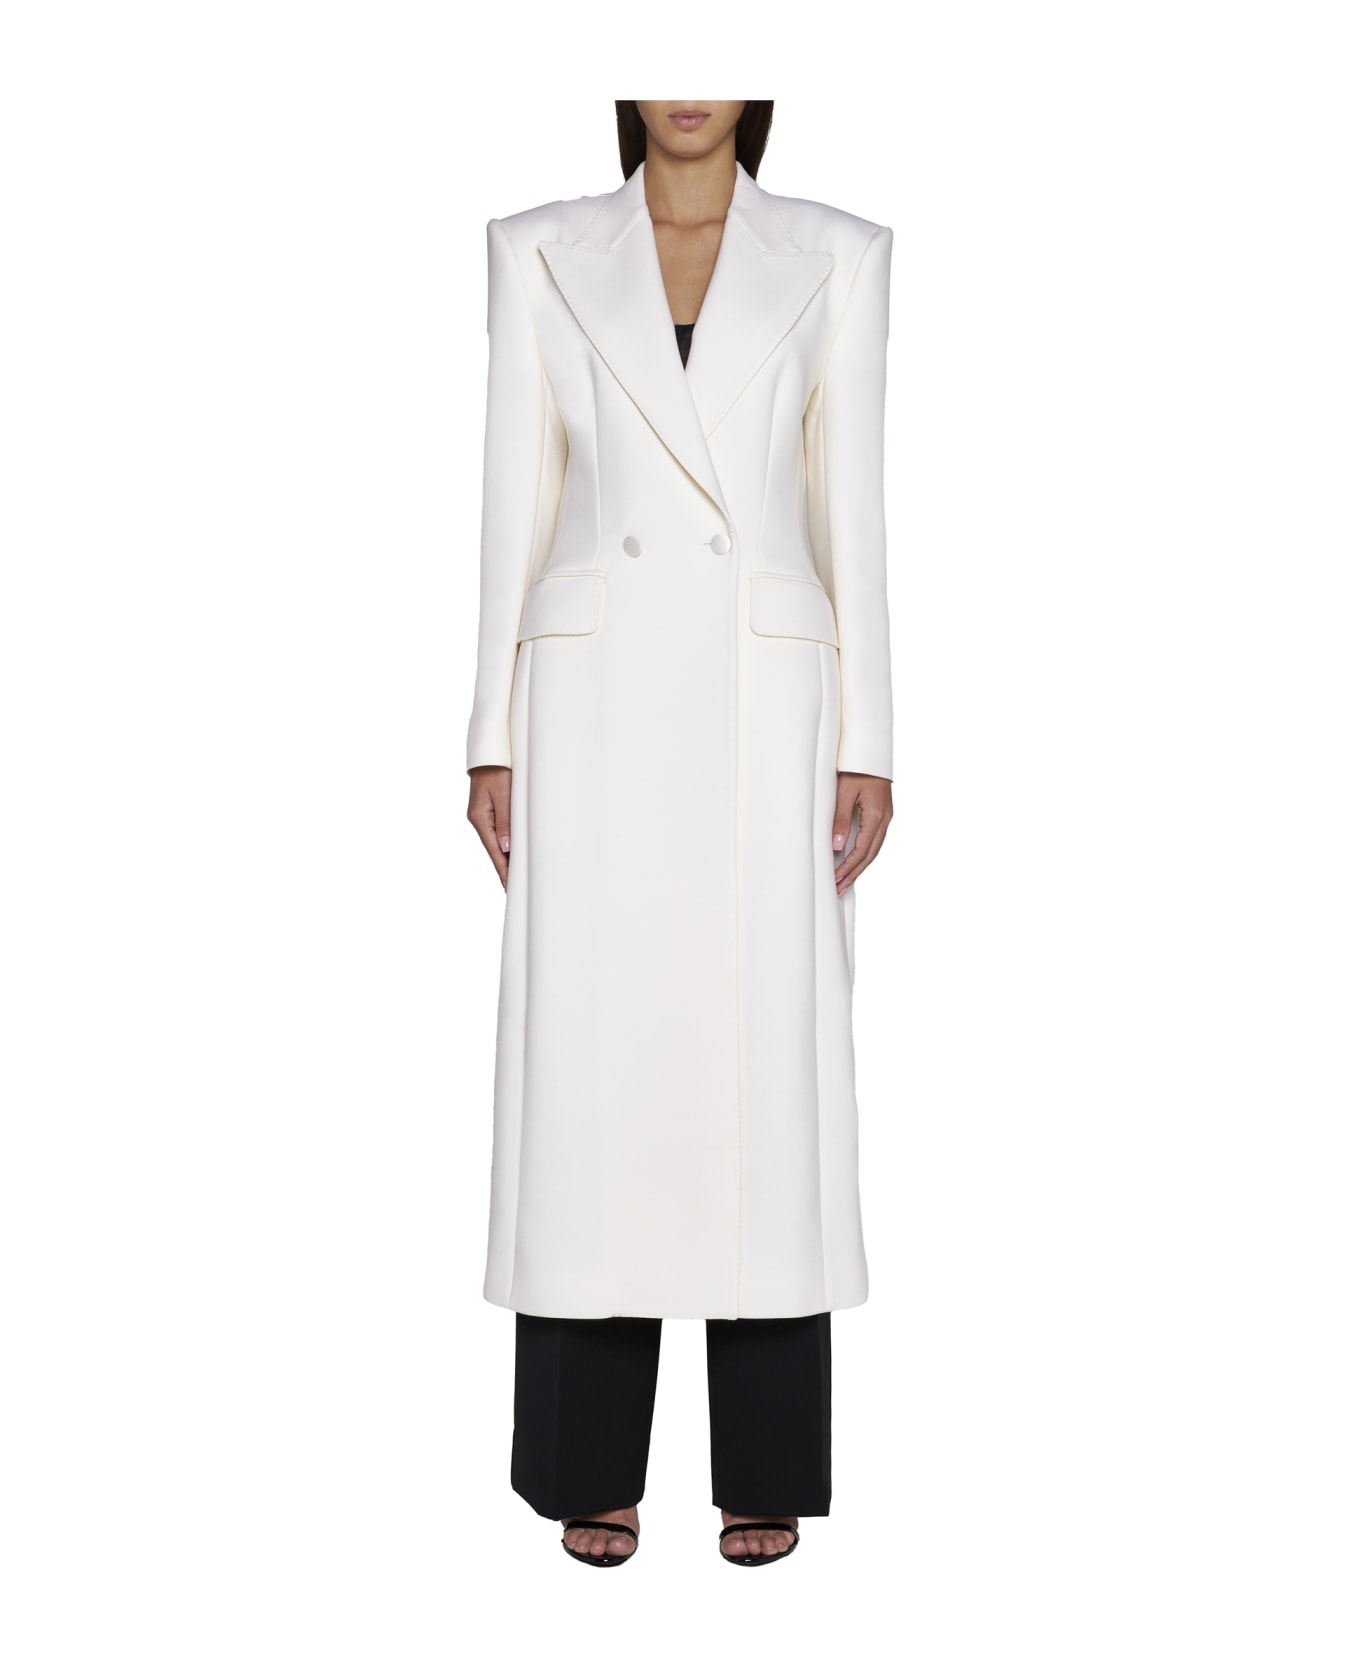 Dolce & Gabbana Double-breasted Coat - Bianco naturale